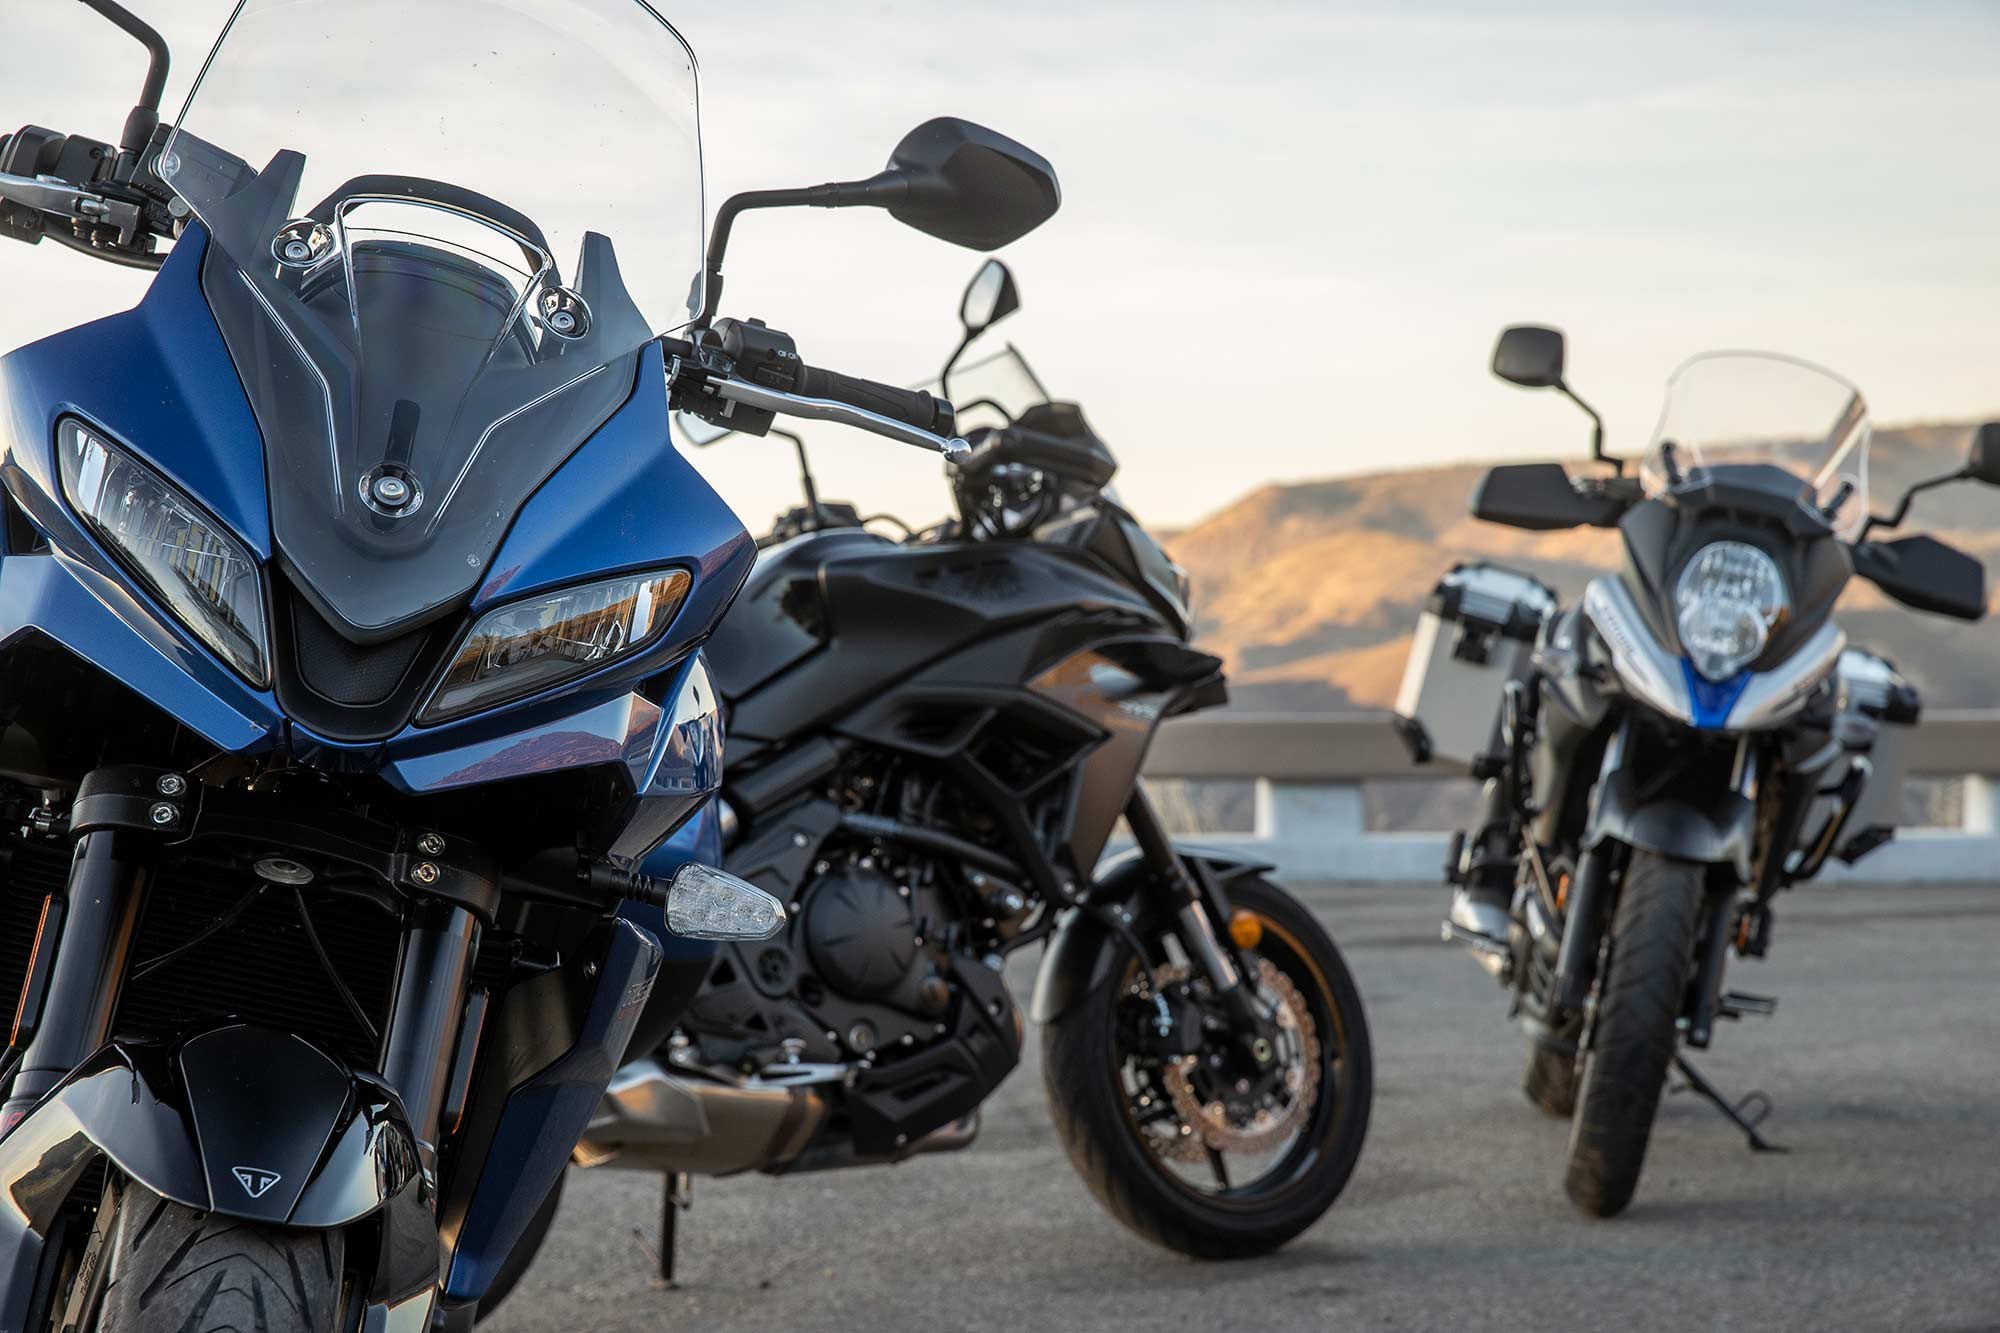 The face of the road-focused middleweight adventure bike category. The sportier front fairing of the Triumph and the beak of the V-Strom highlight different approaches.